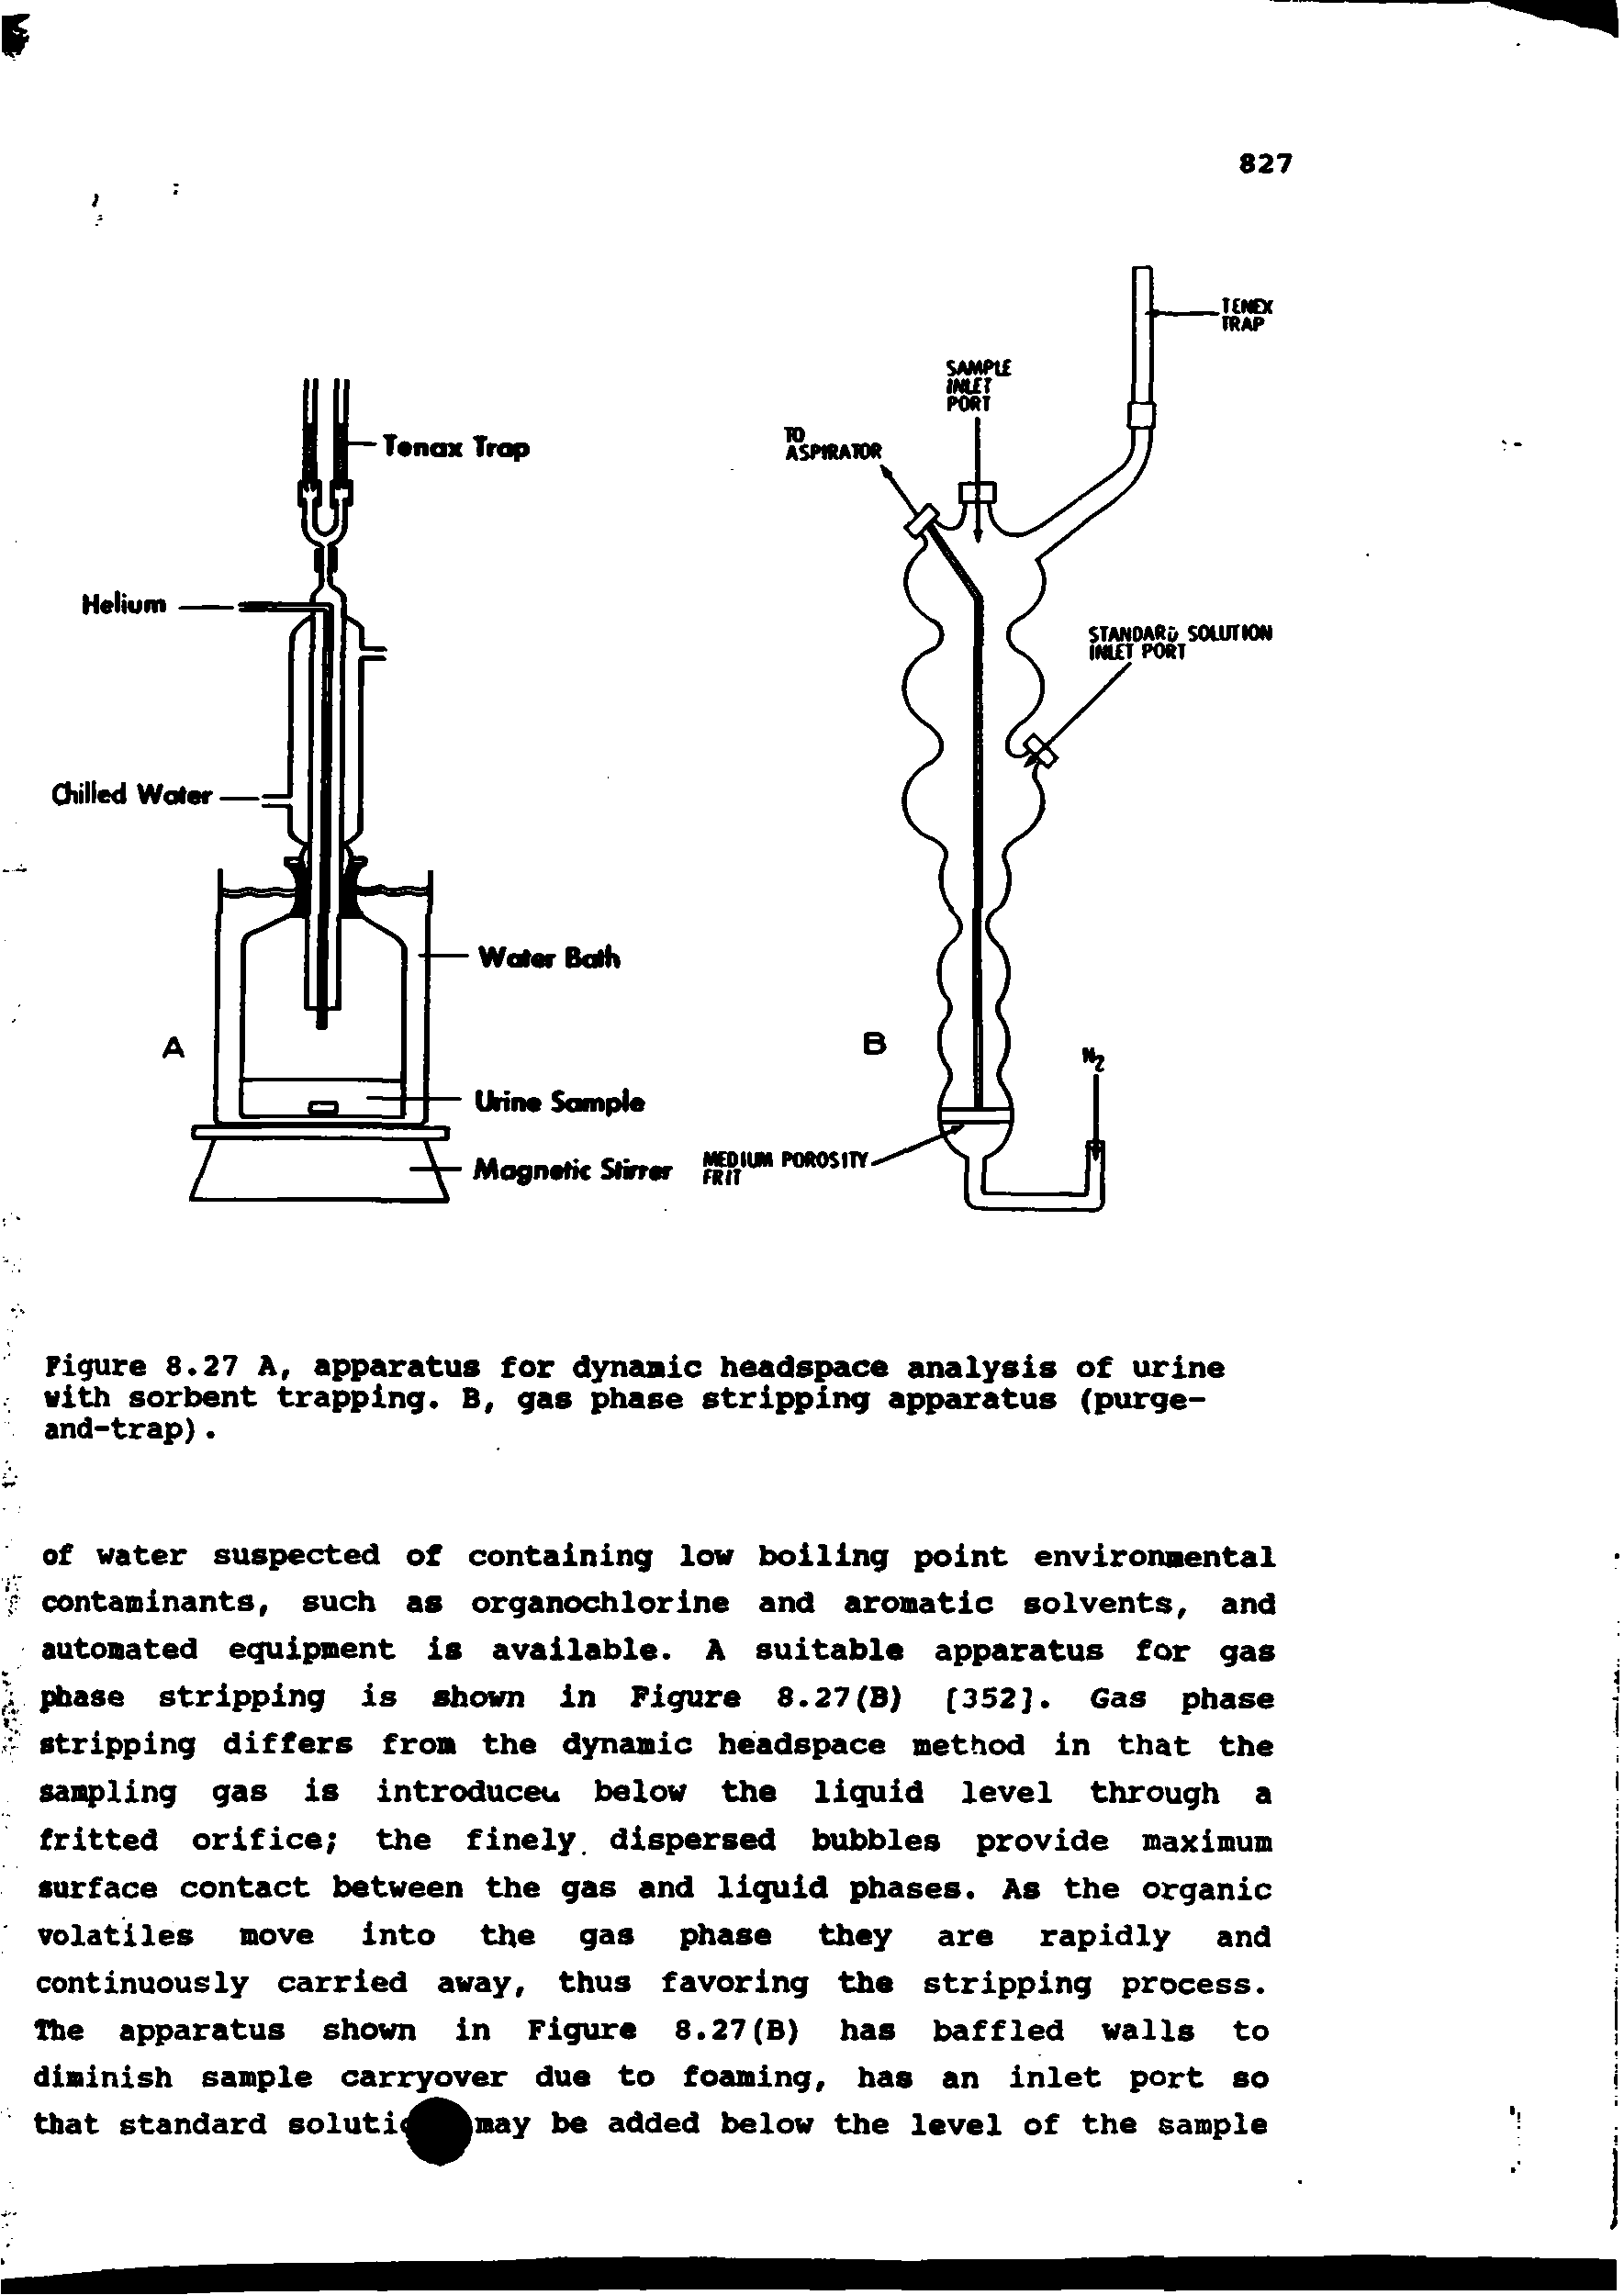 Figure 8.27 A, apparatus for dynaaic headspace analysis of urine with sorbent trapping. B, gas phase stripping apparatus (purge-and-trap).